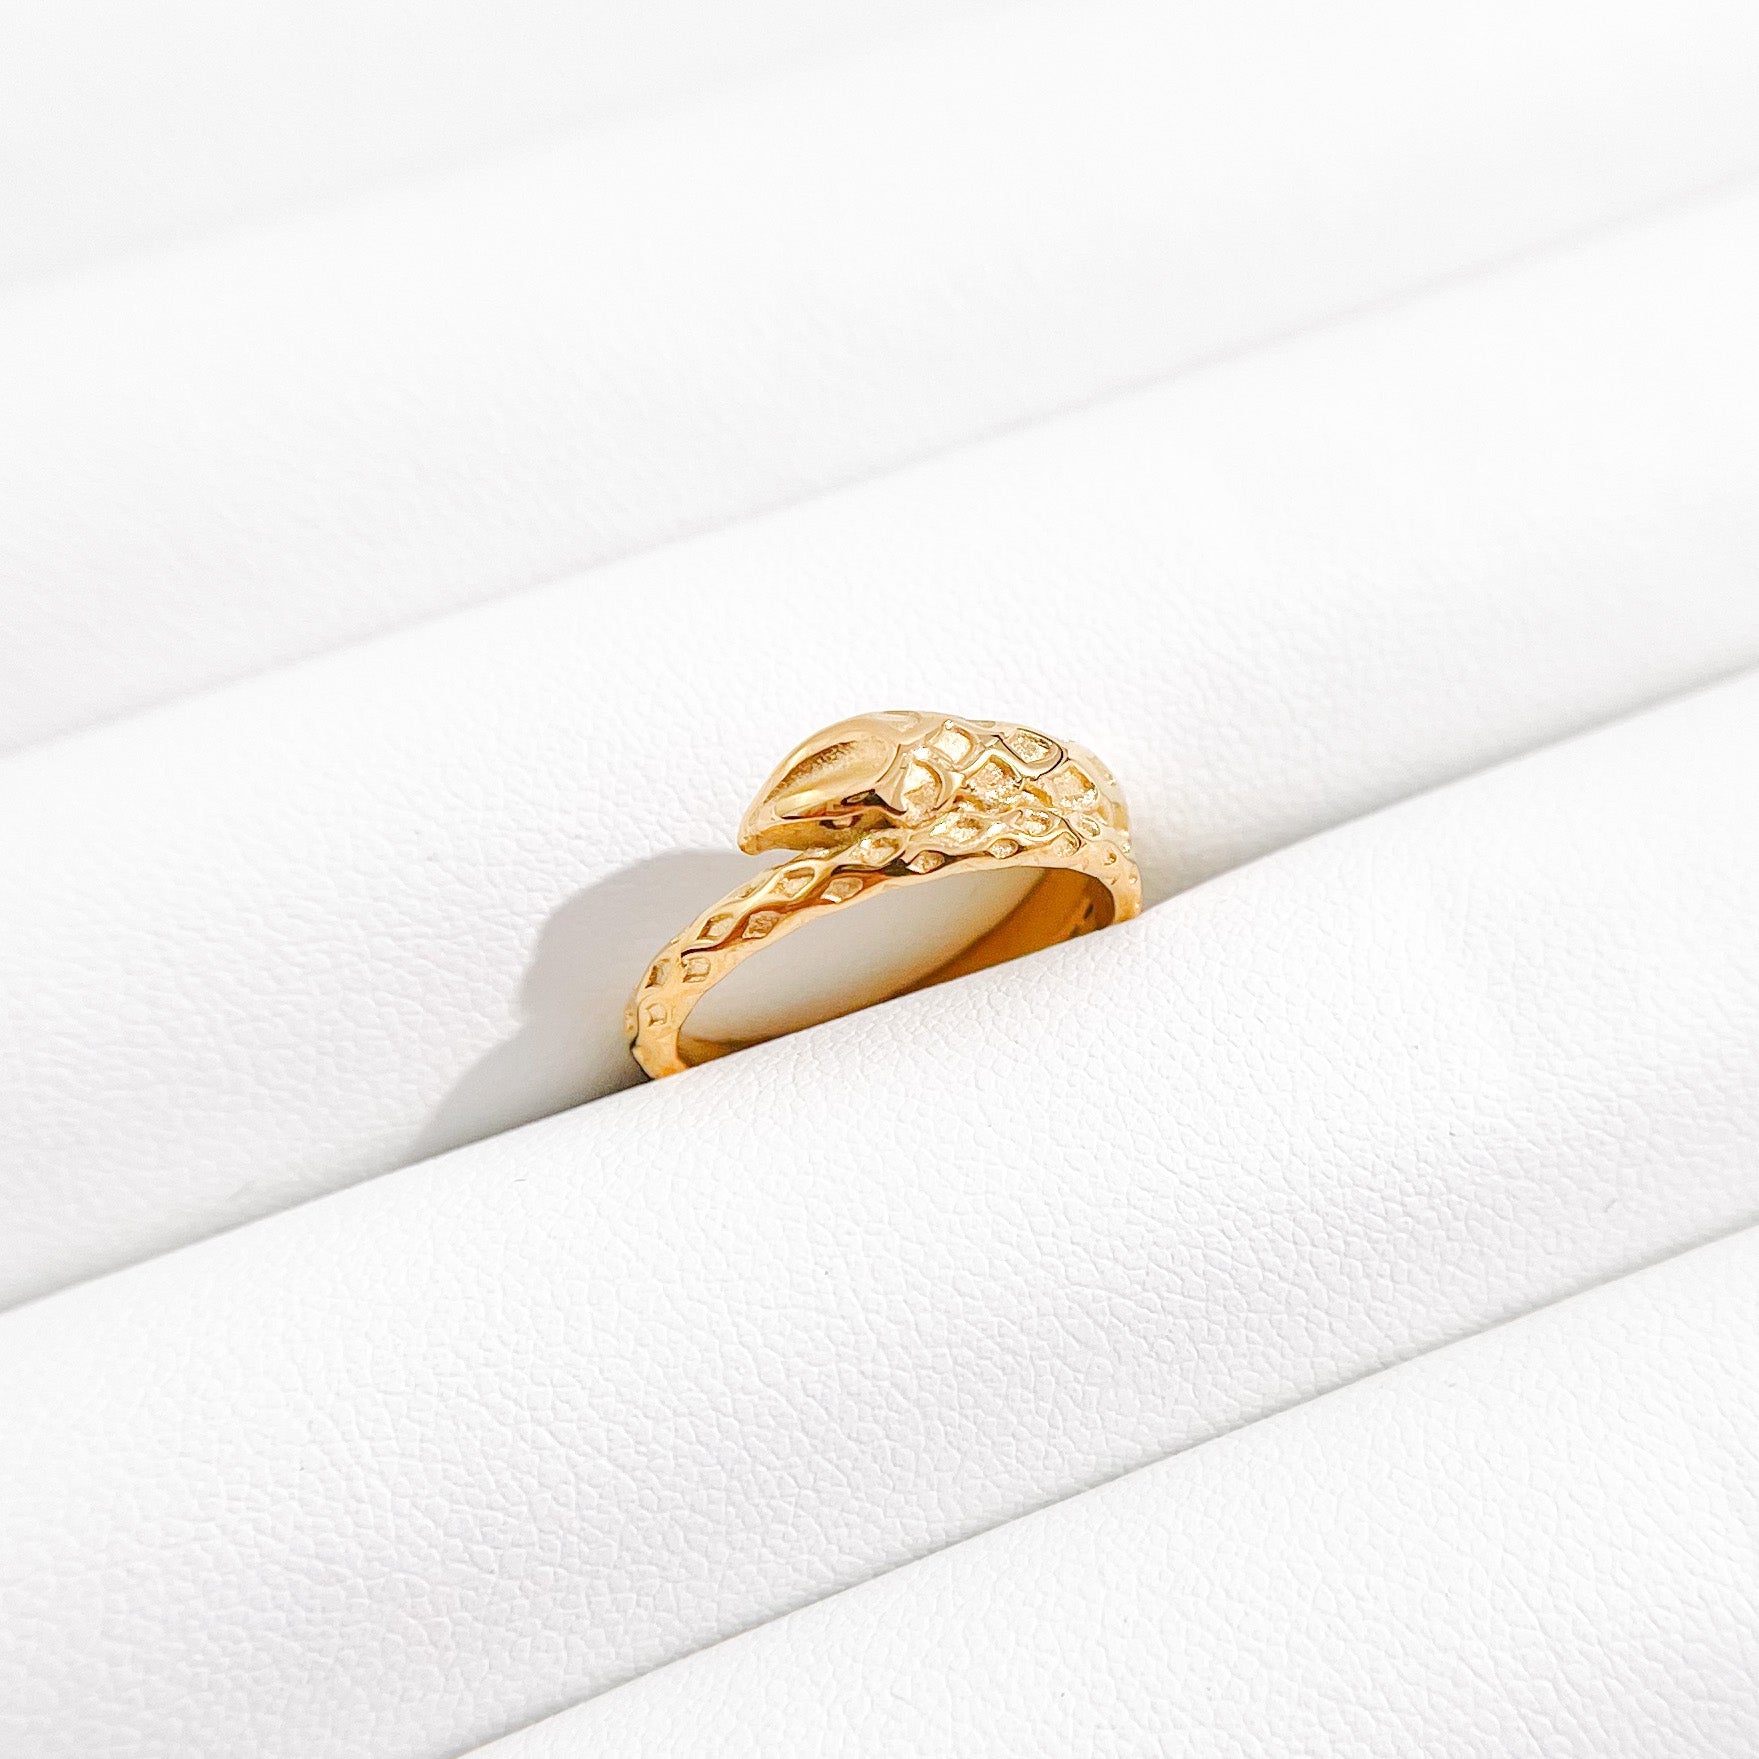 Serpent Ring in Gold - Flaire & Co.